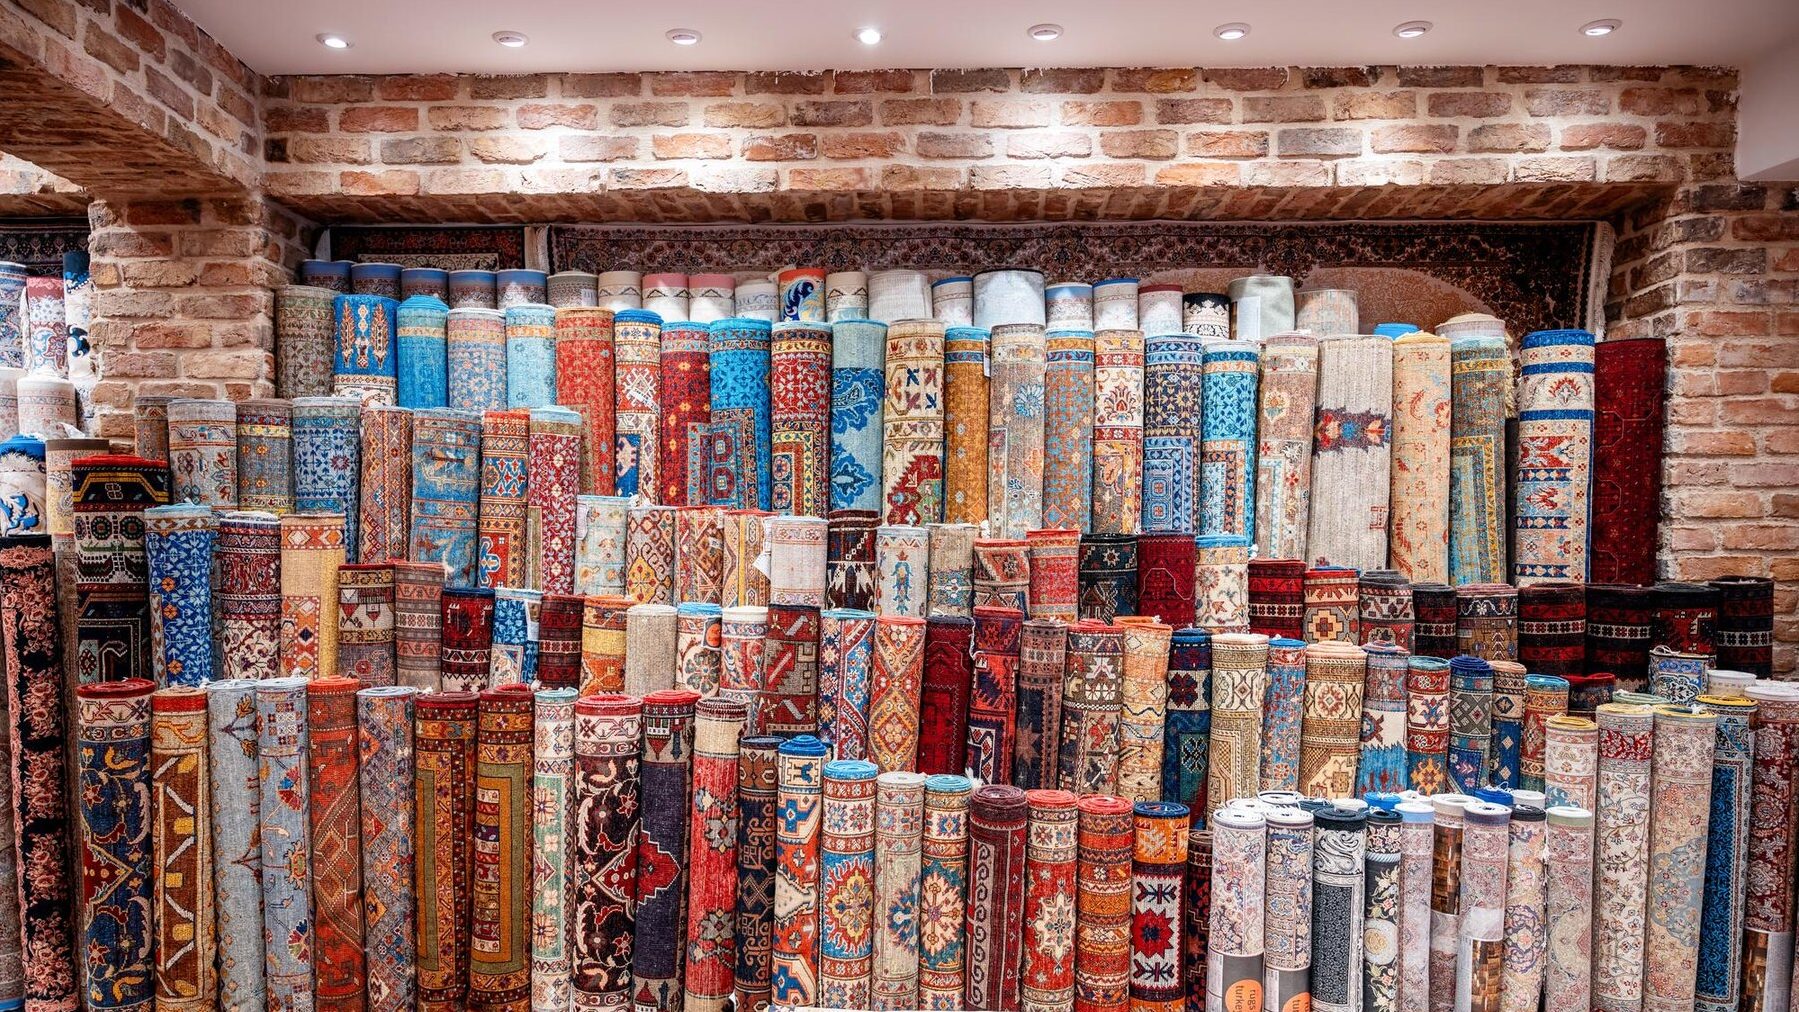 50 Years. Superb Collection of Persian Rugs. - Including the largest selection of Bijars outside Iran | Call Us at 1-844-650-0011